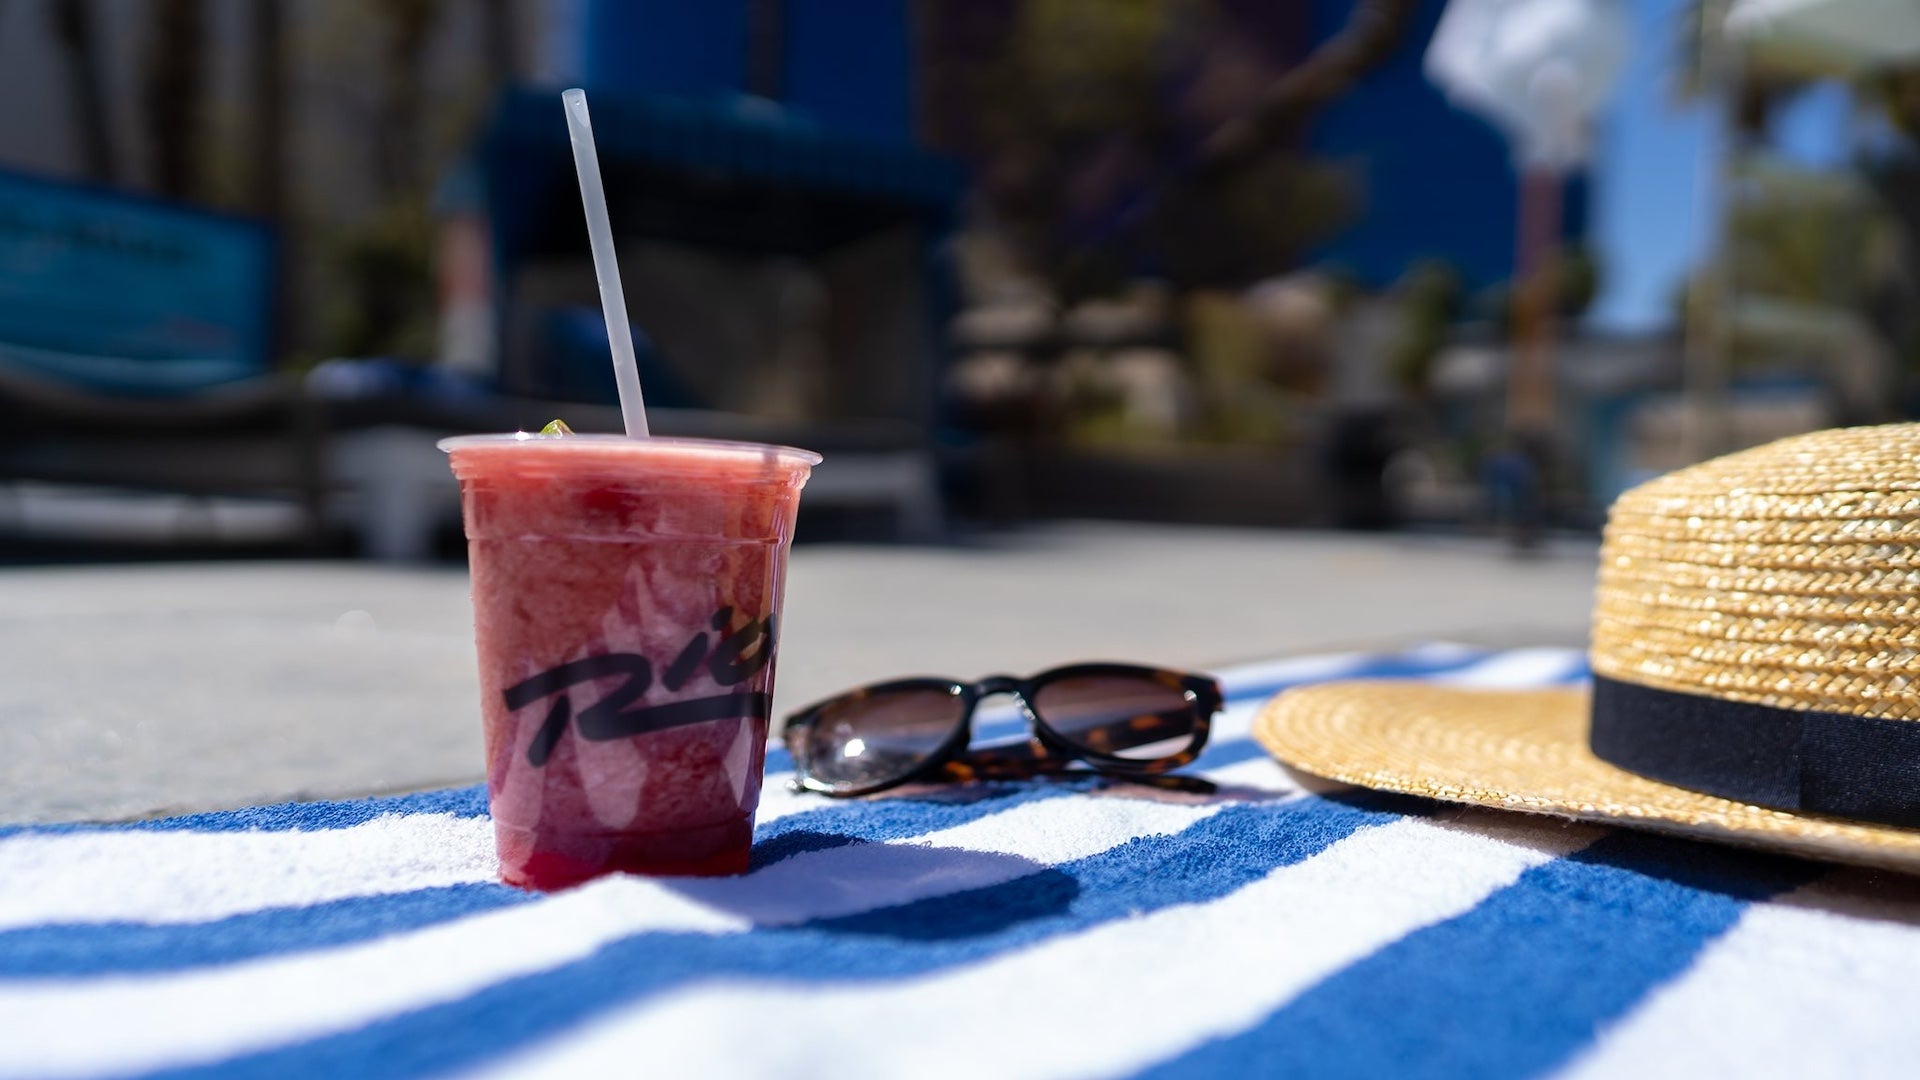 Frozen drink on a blue and white striped towel with a pair of sunglasses and a hat sitting next to it